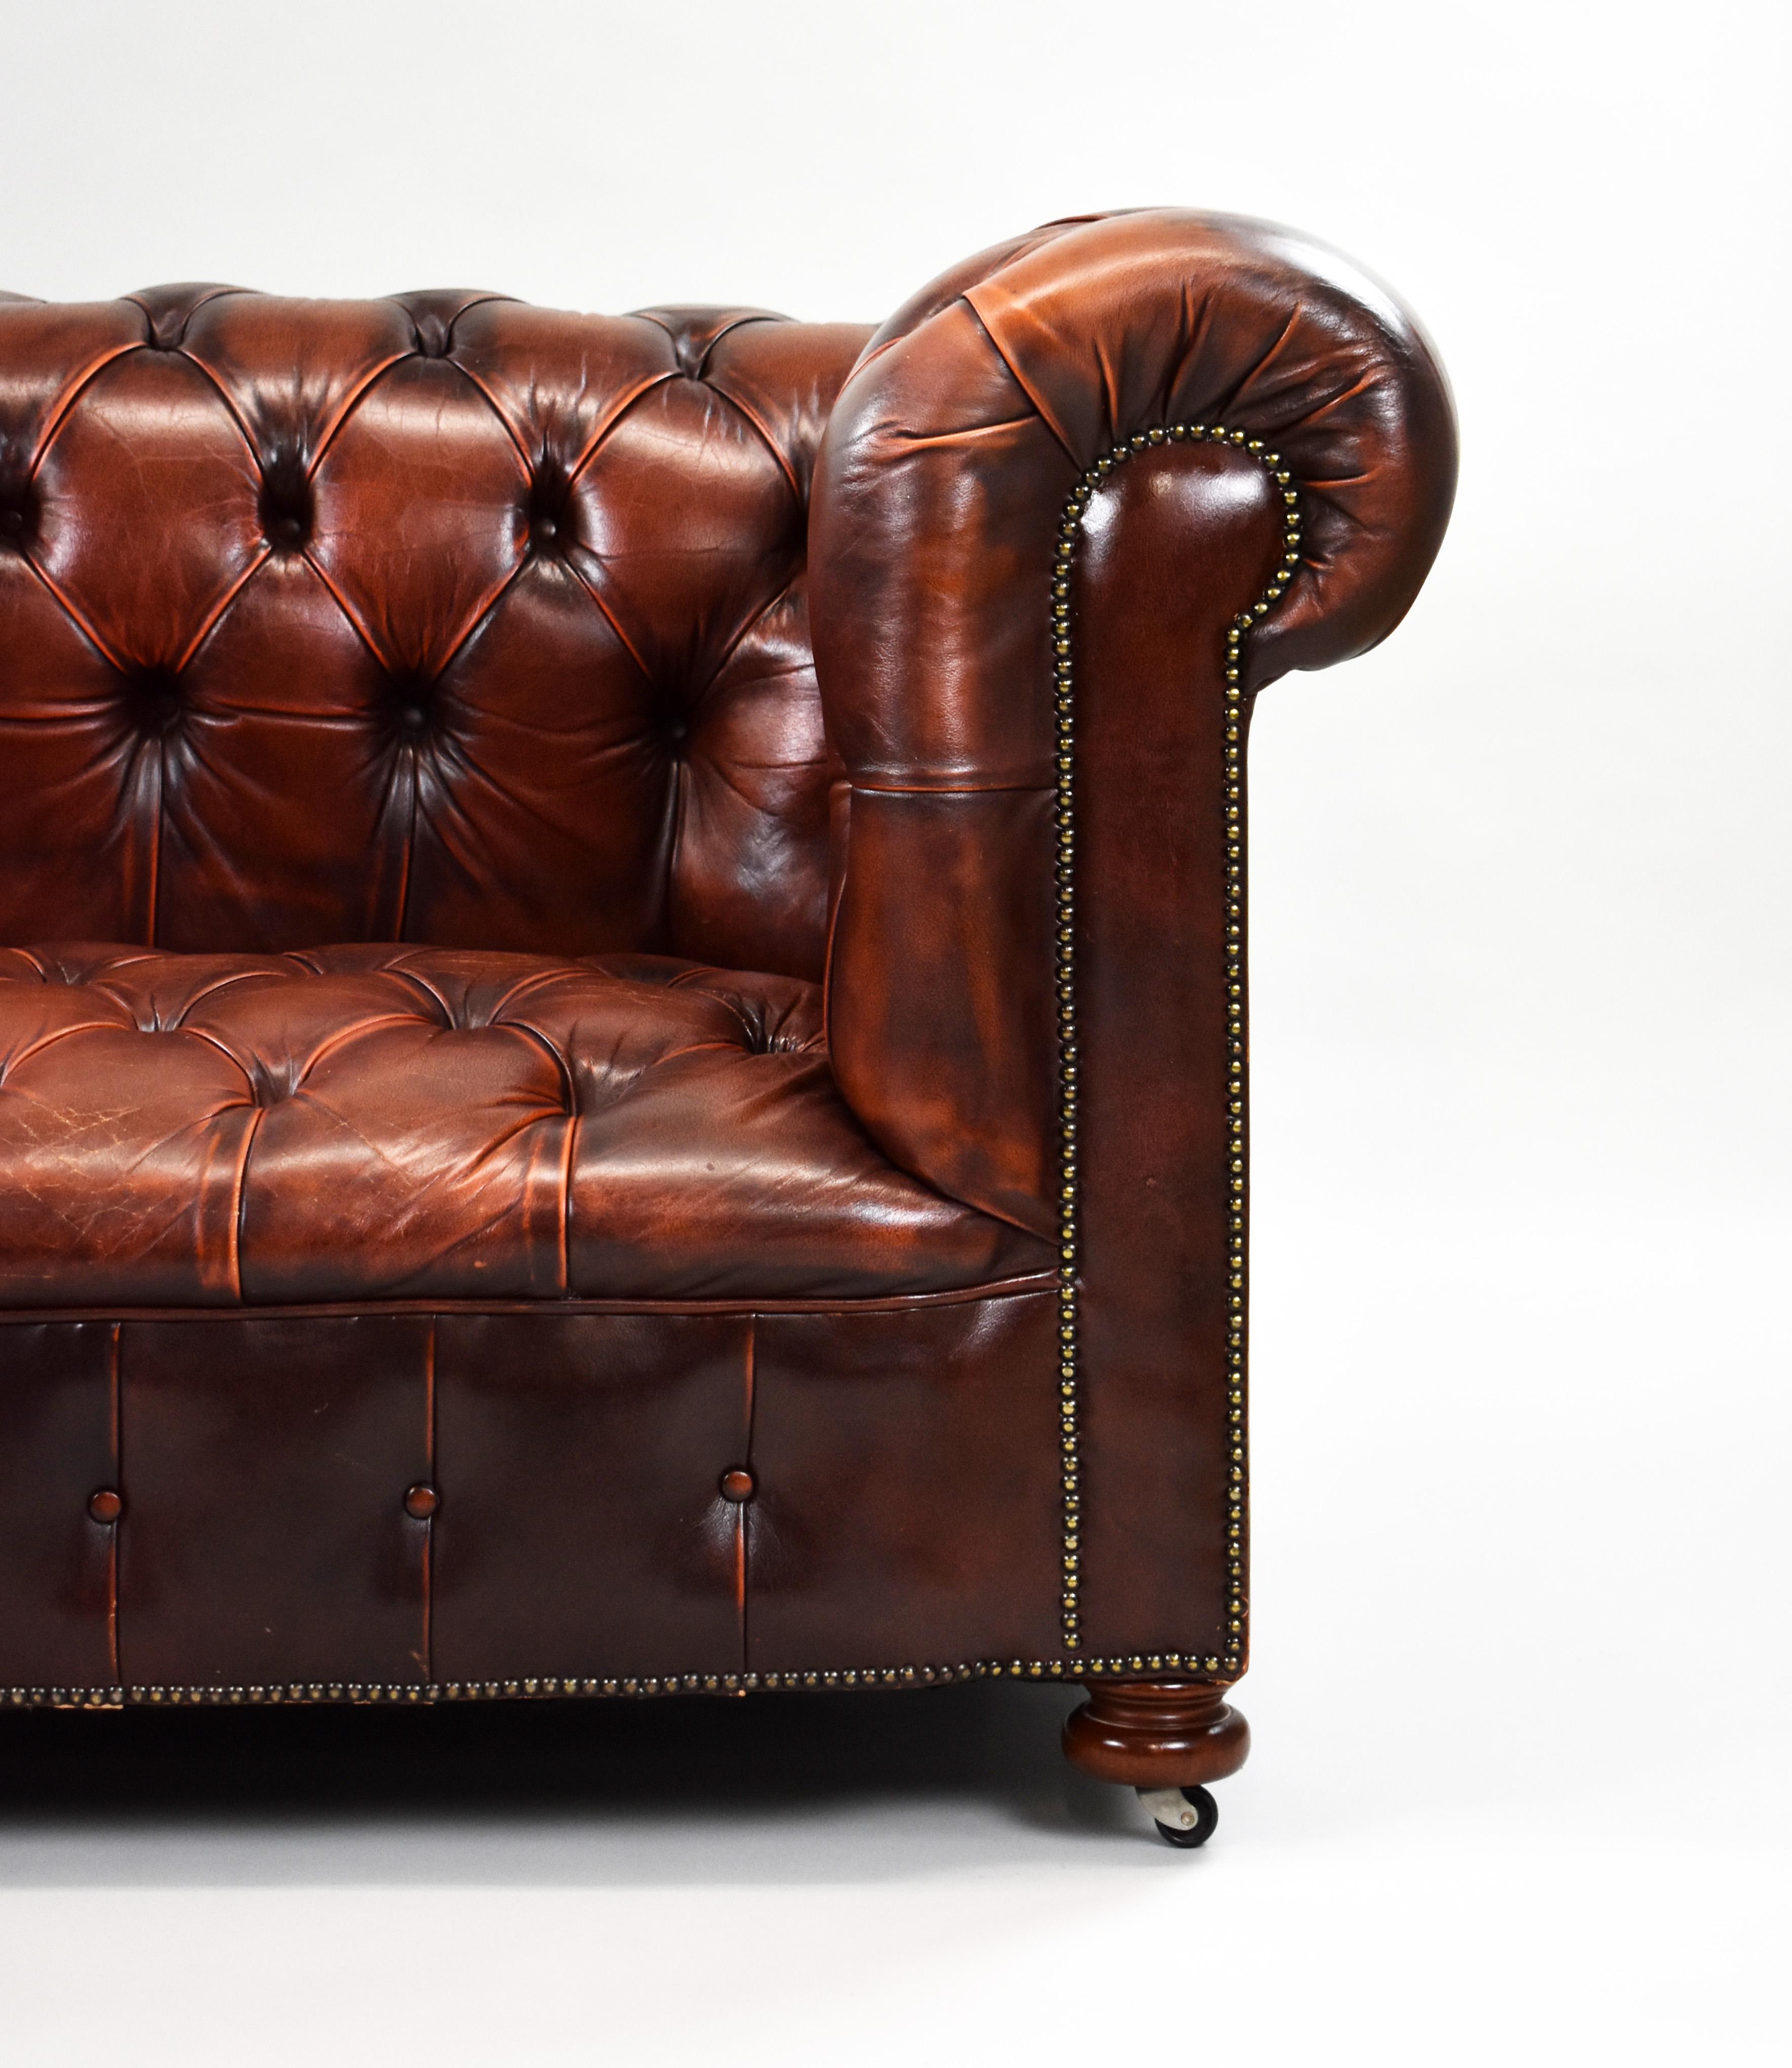 20th Century English Leather Chesterfield Suite 2